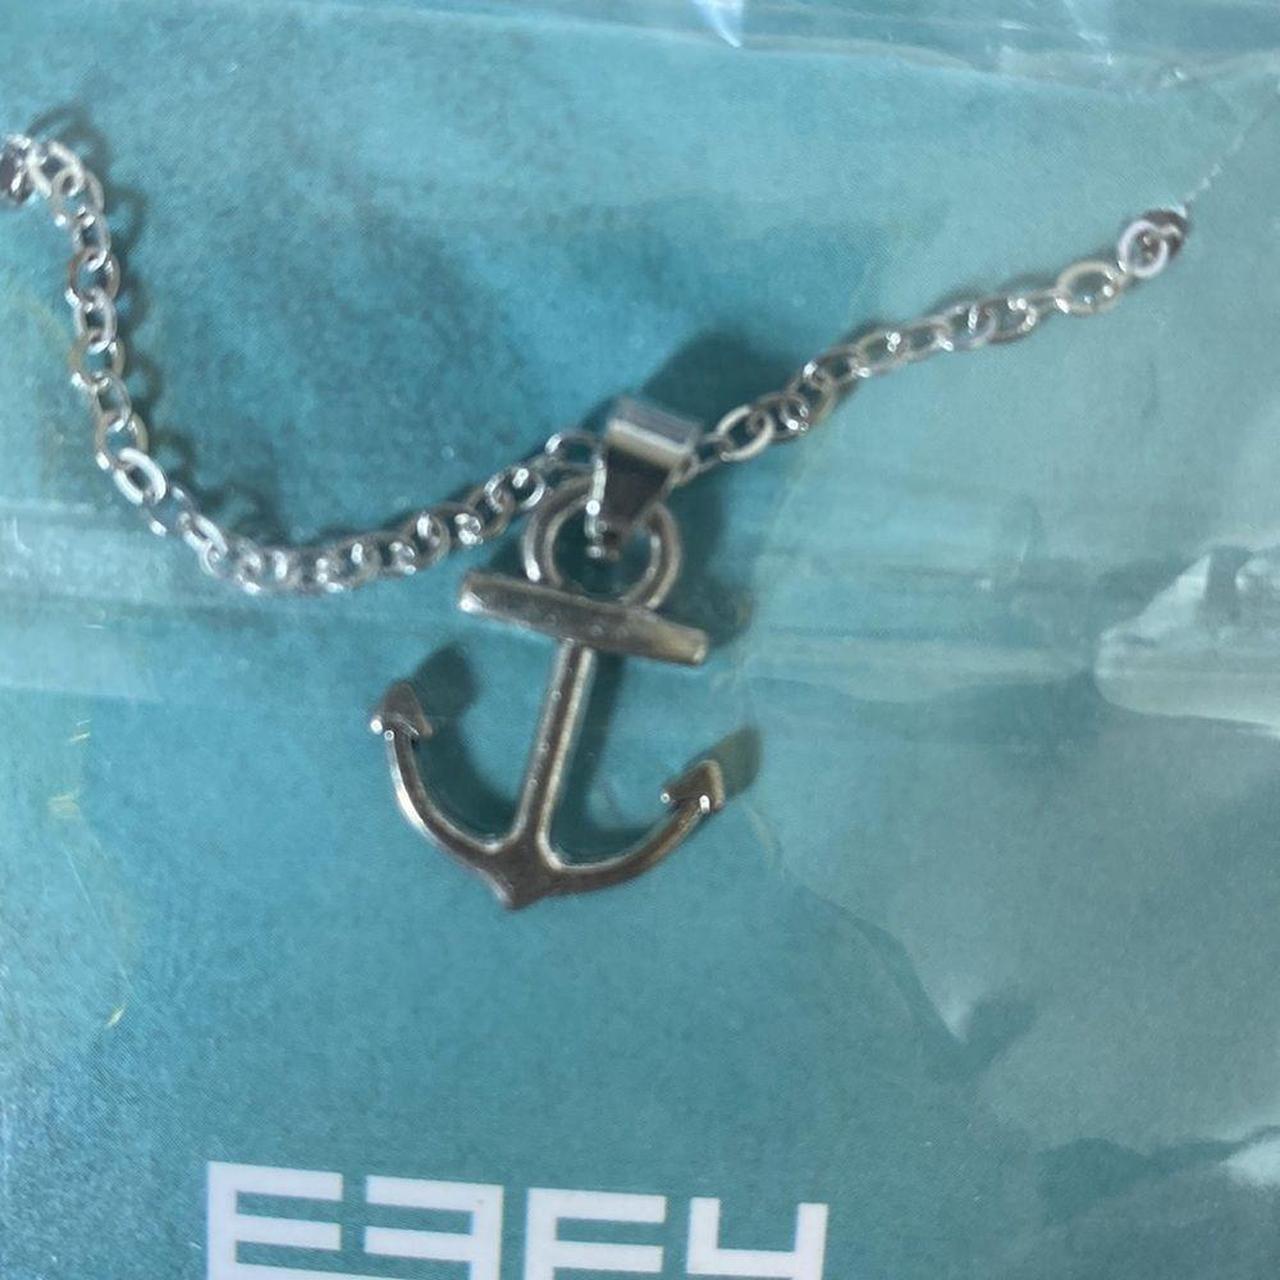 Effy Silver Tone Anchor Pendant Necklace New in Packaging | eBay